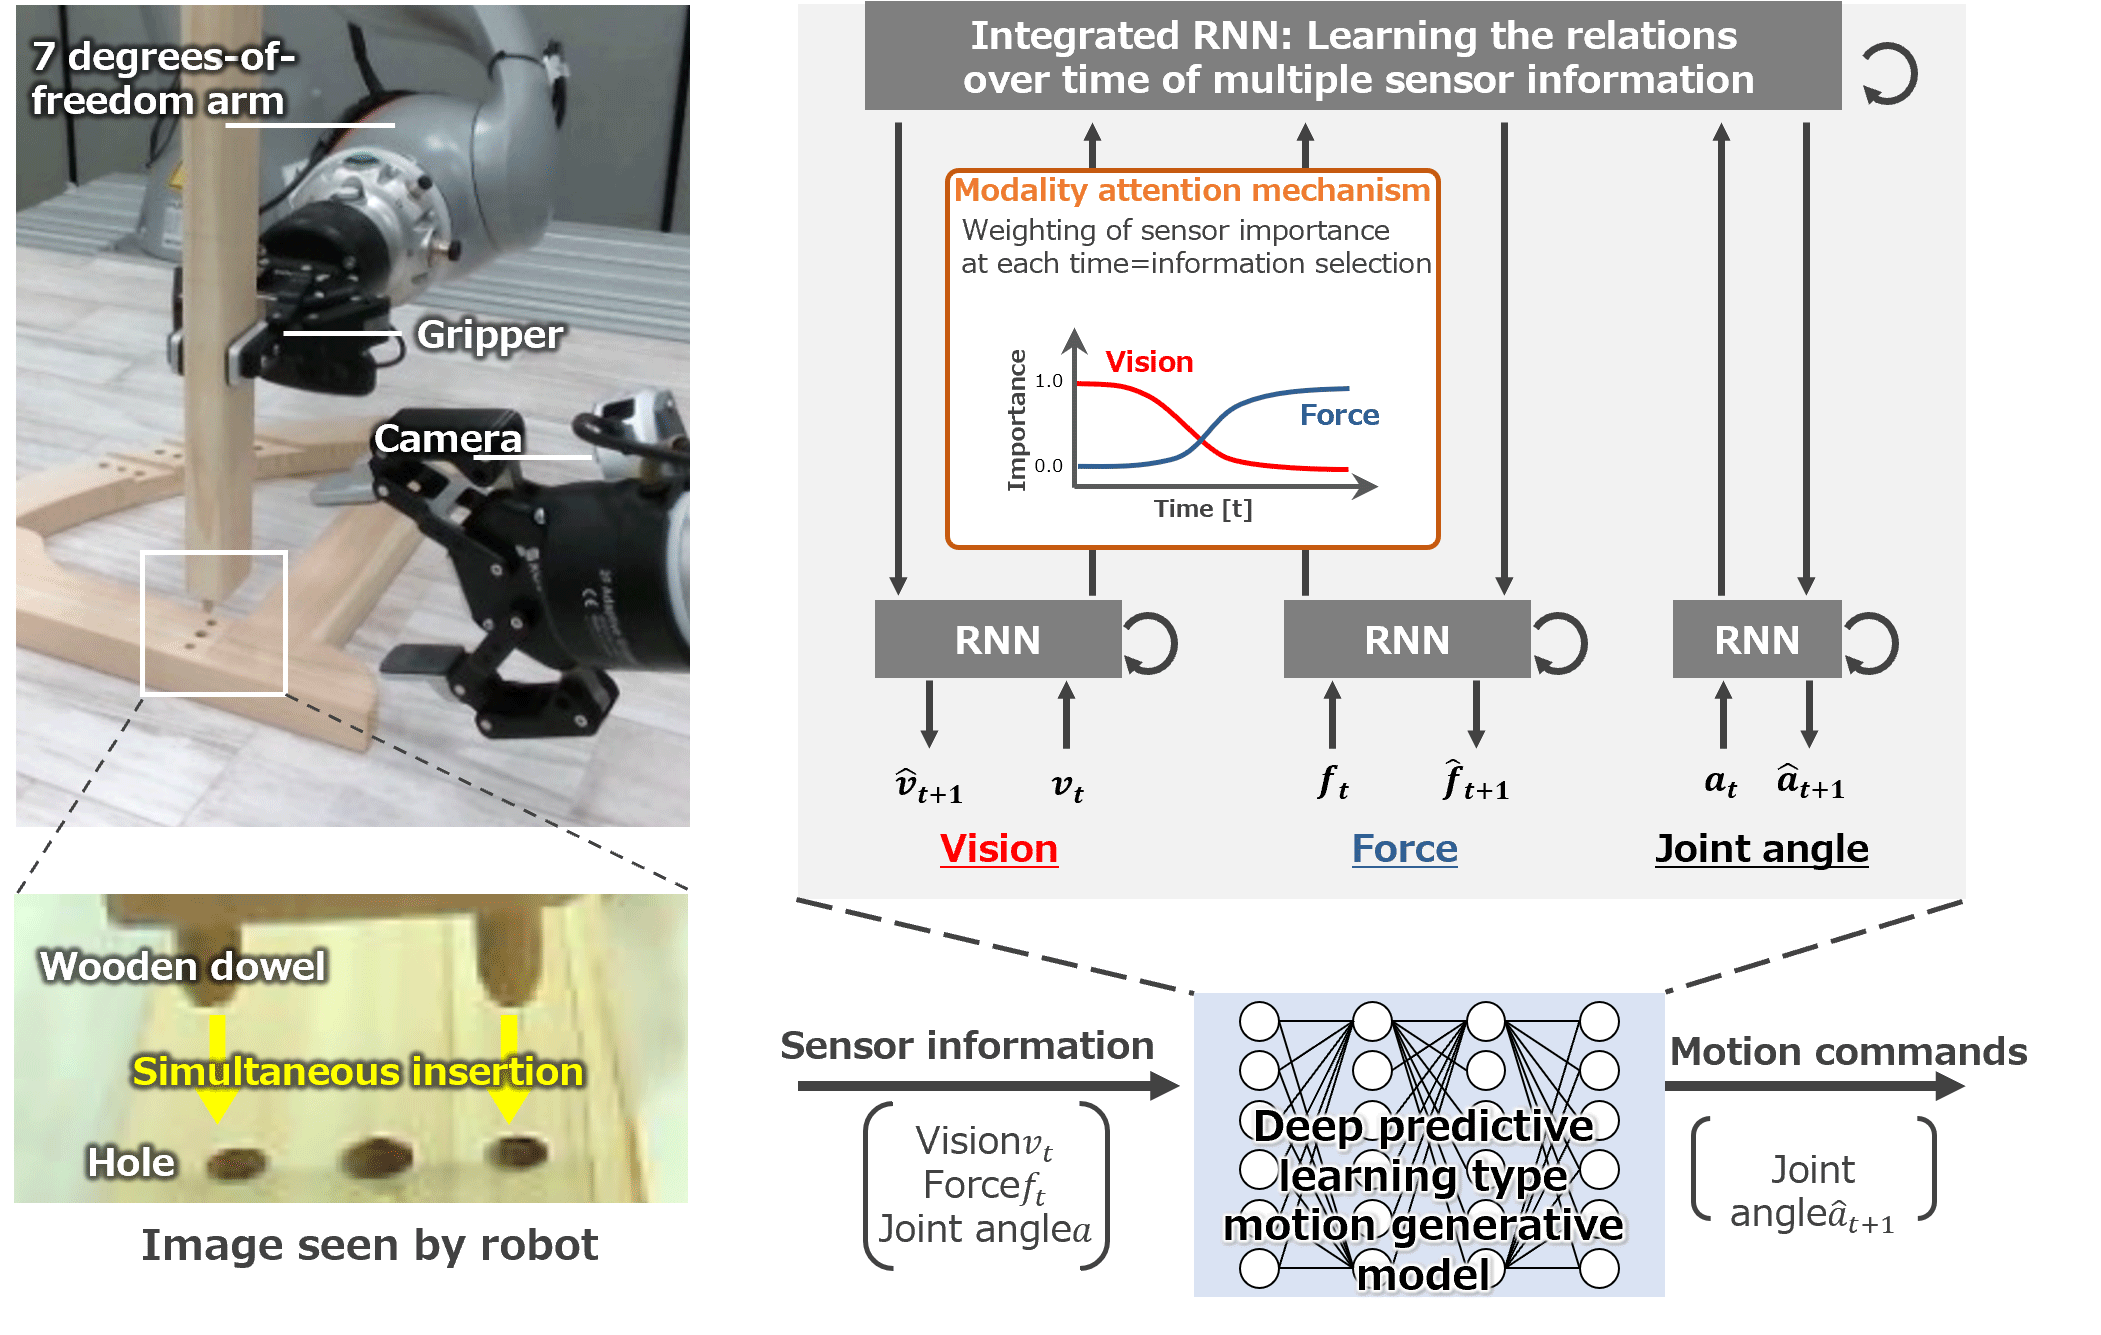 Figure 1: Technology for real-time switching of the attention paid by a robot to vision and force sensor information based on the work to be performed and the environment